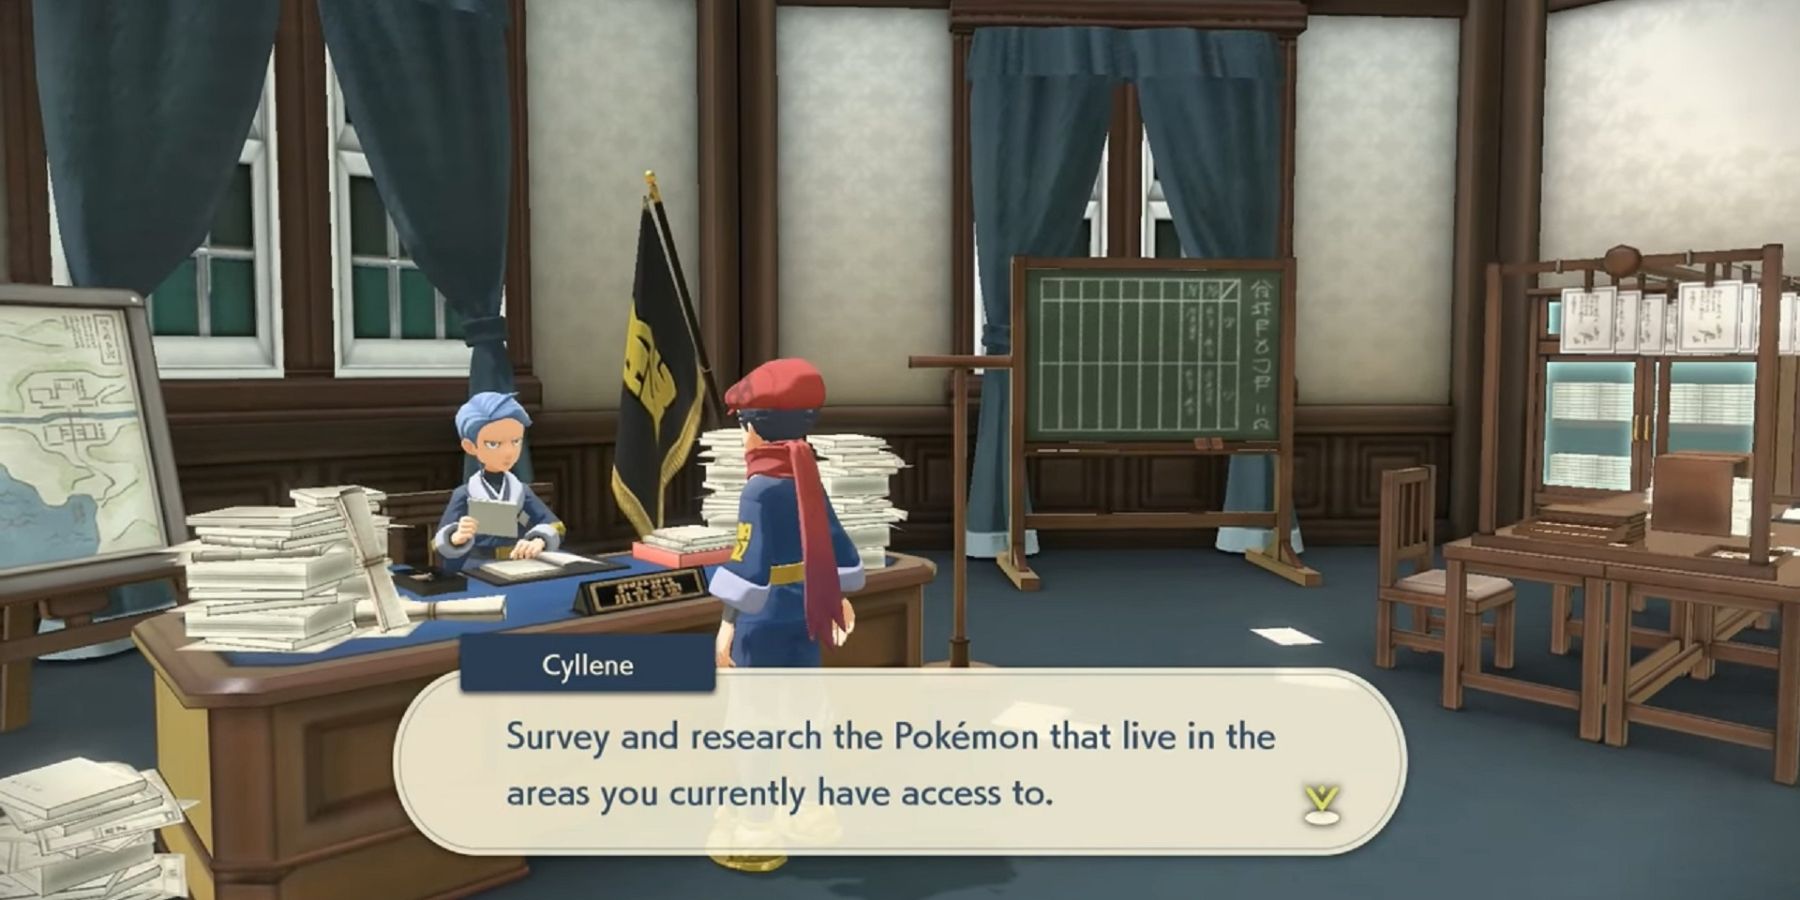 Actually researching Pokémon is a main objective in Legends: Arceus